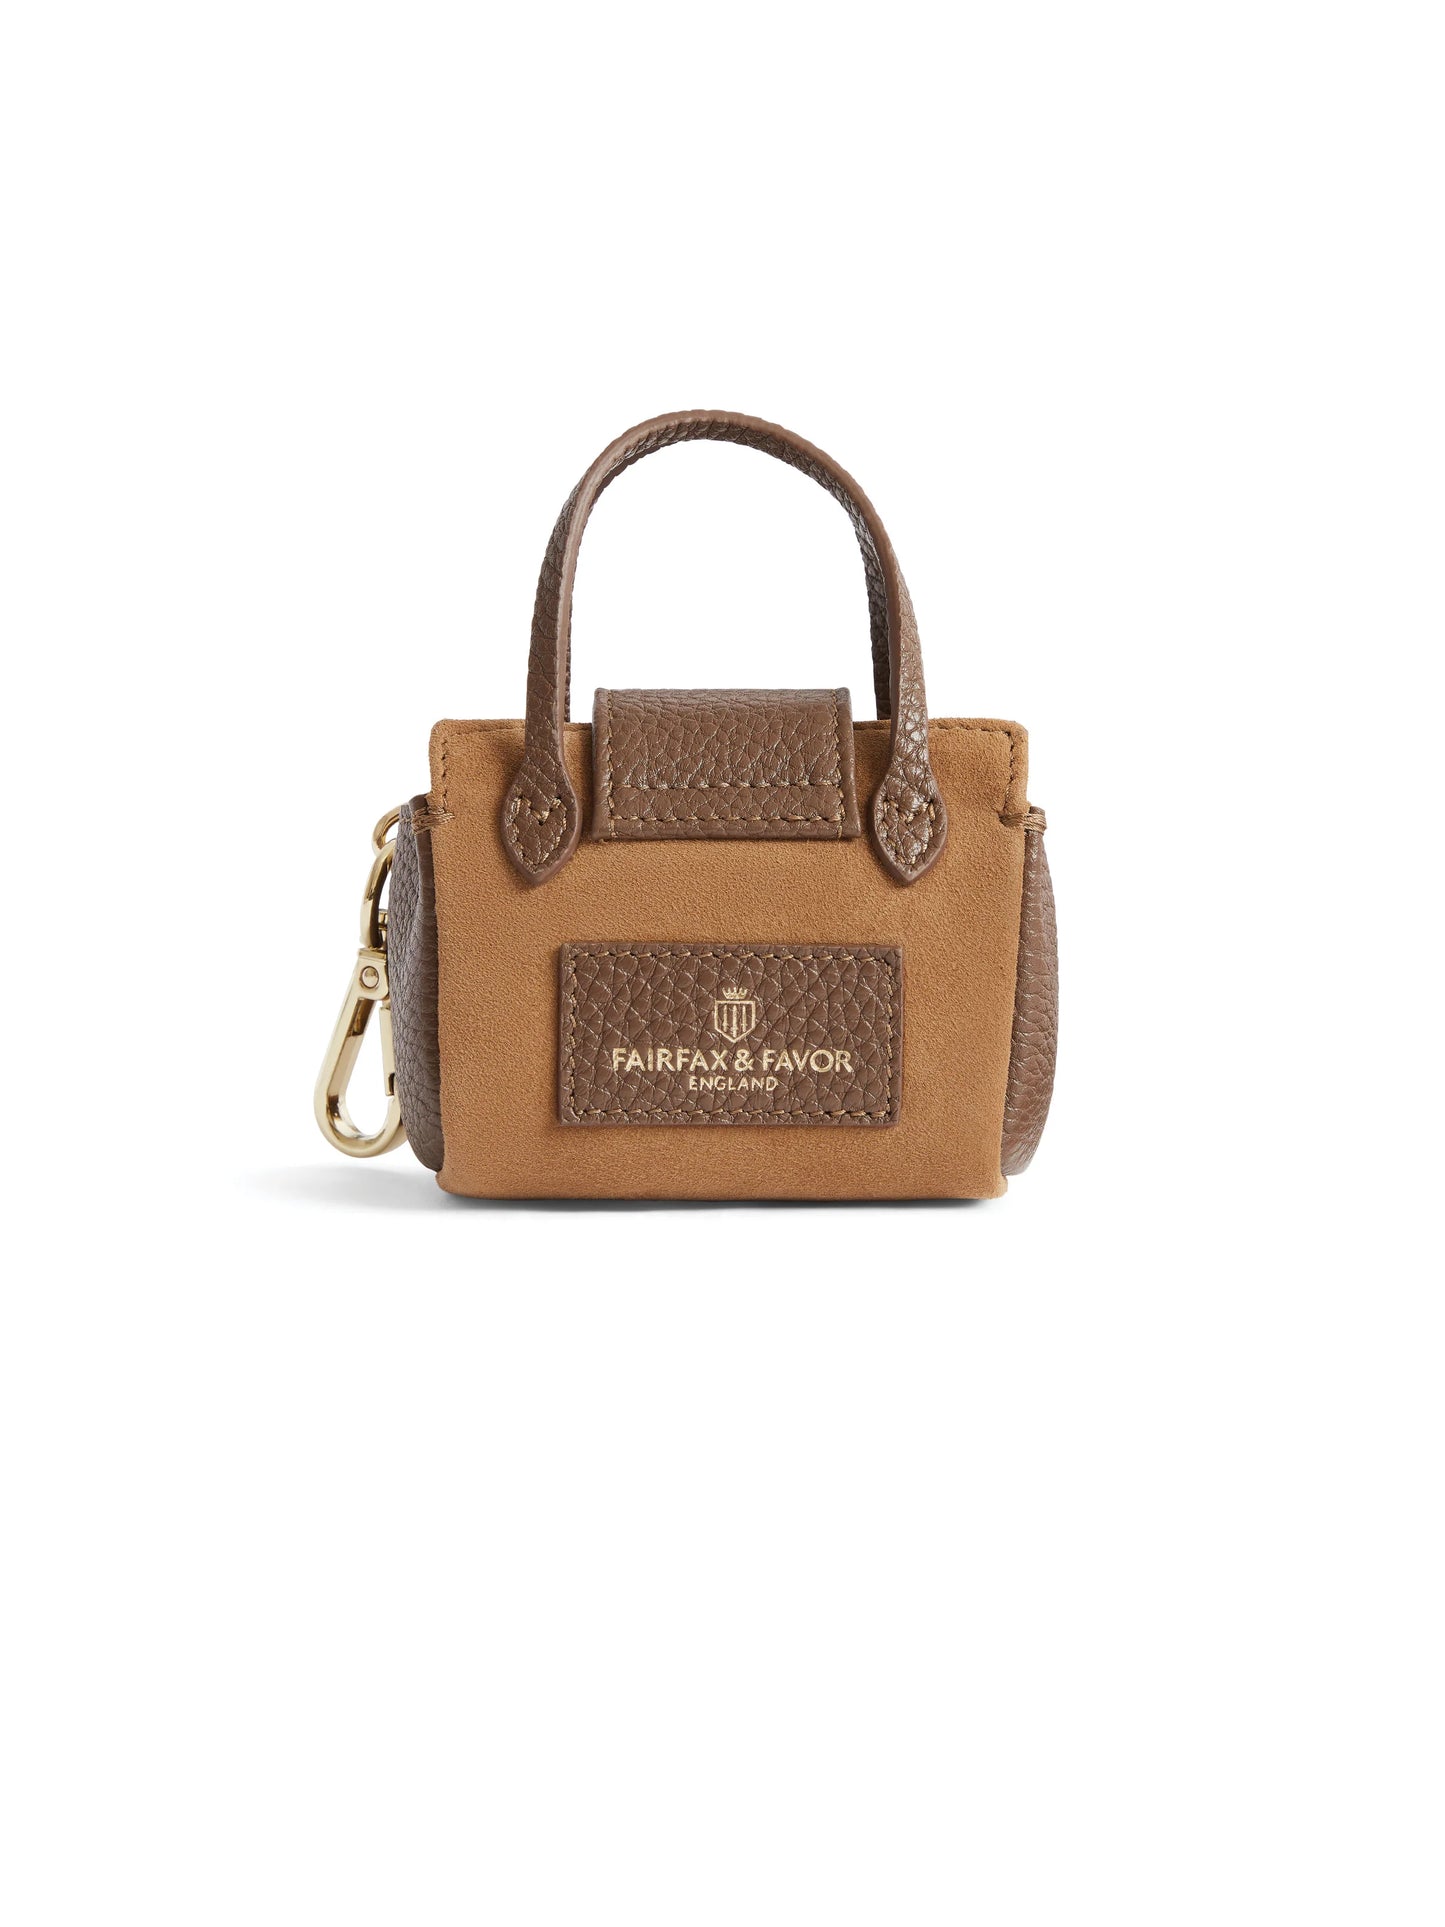 The Mini Windsor Shopping Tote in Tan Suede & Leather